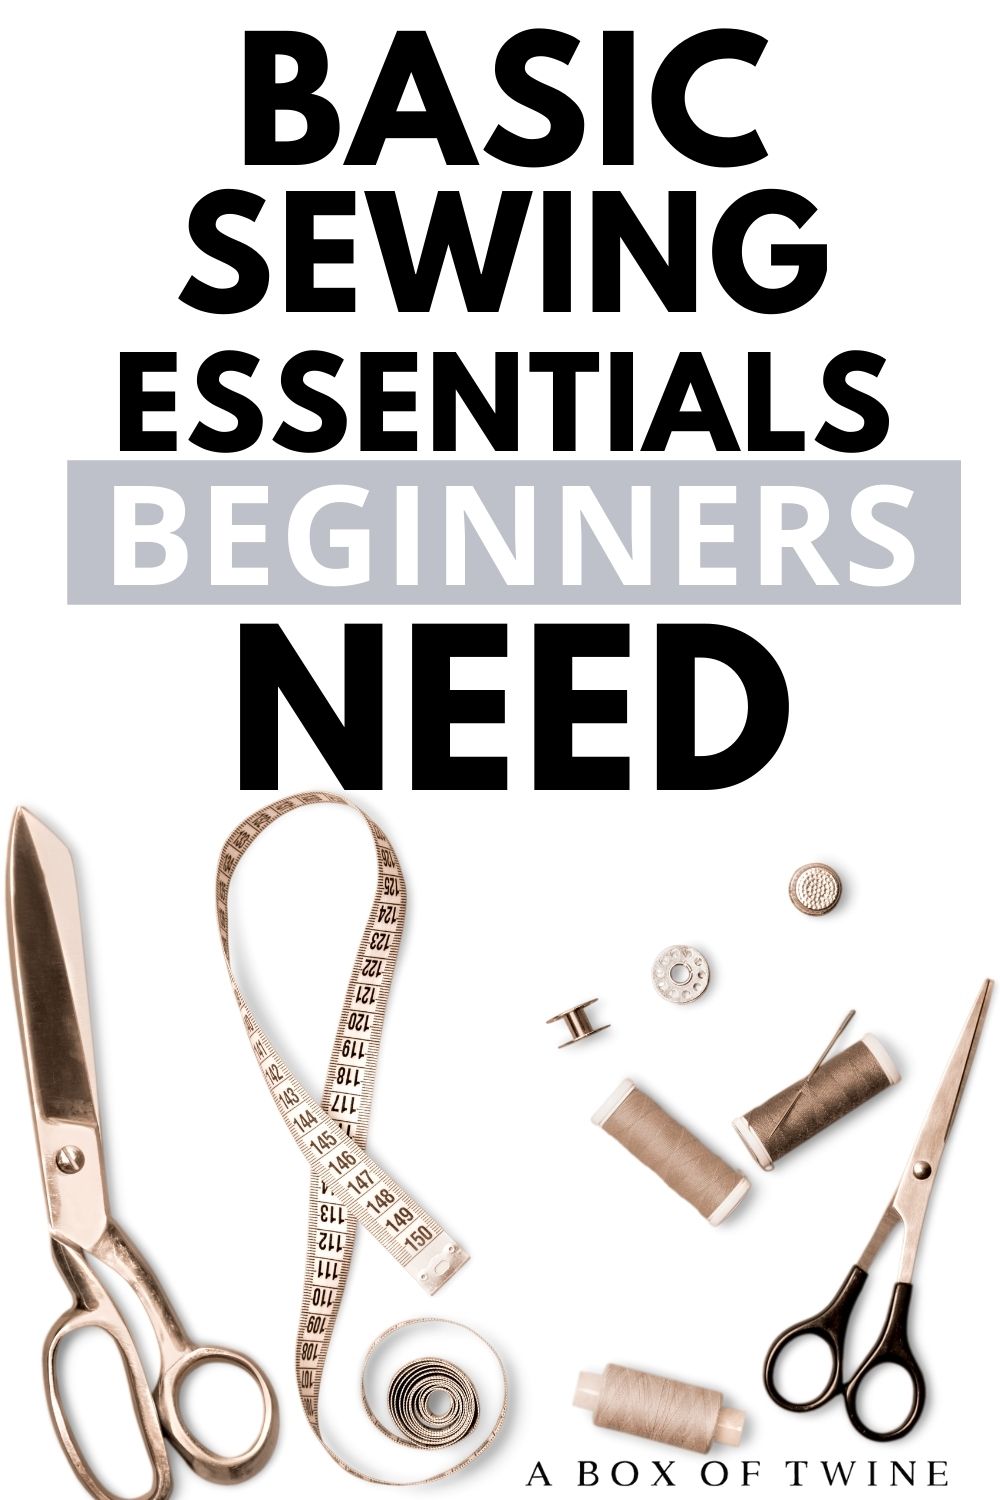 Sewing Must Haves For Beginners (12 Basic Sewing Supplies) 